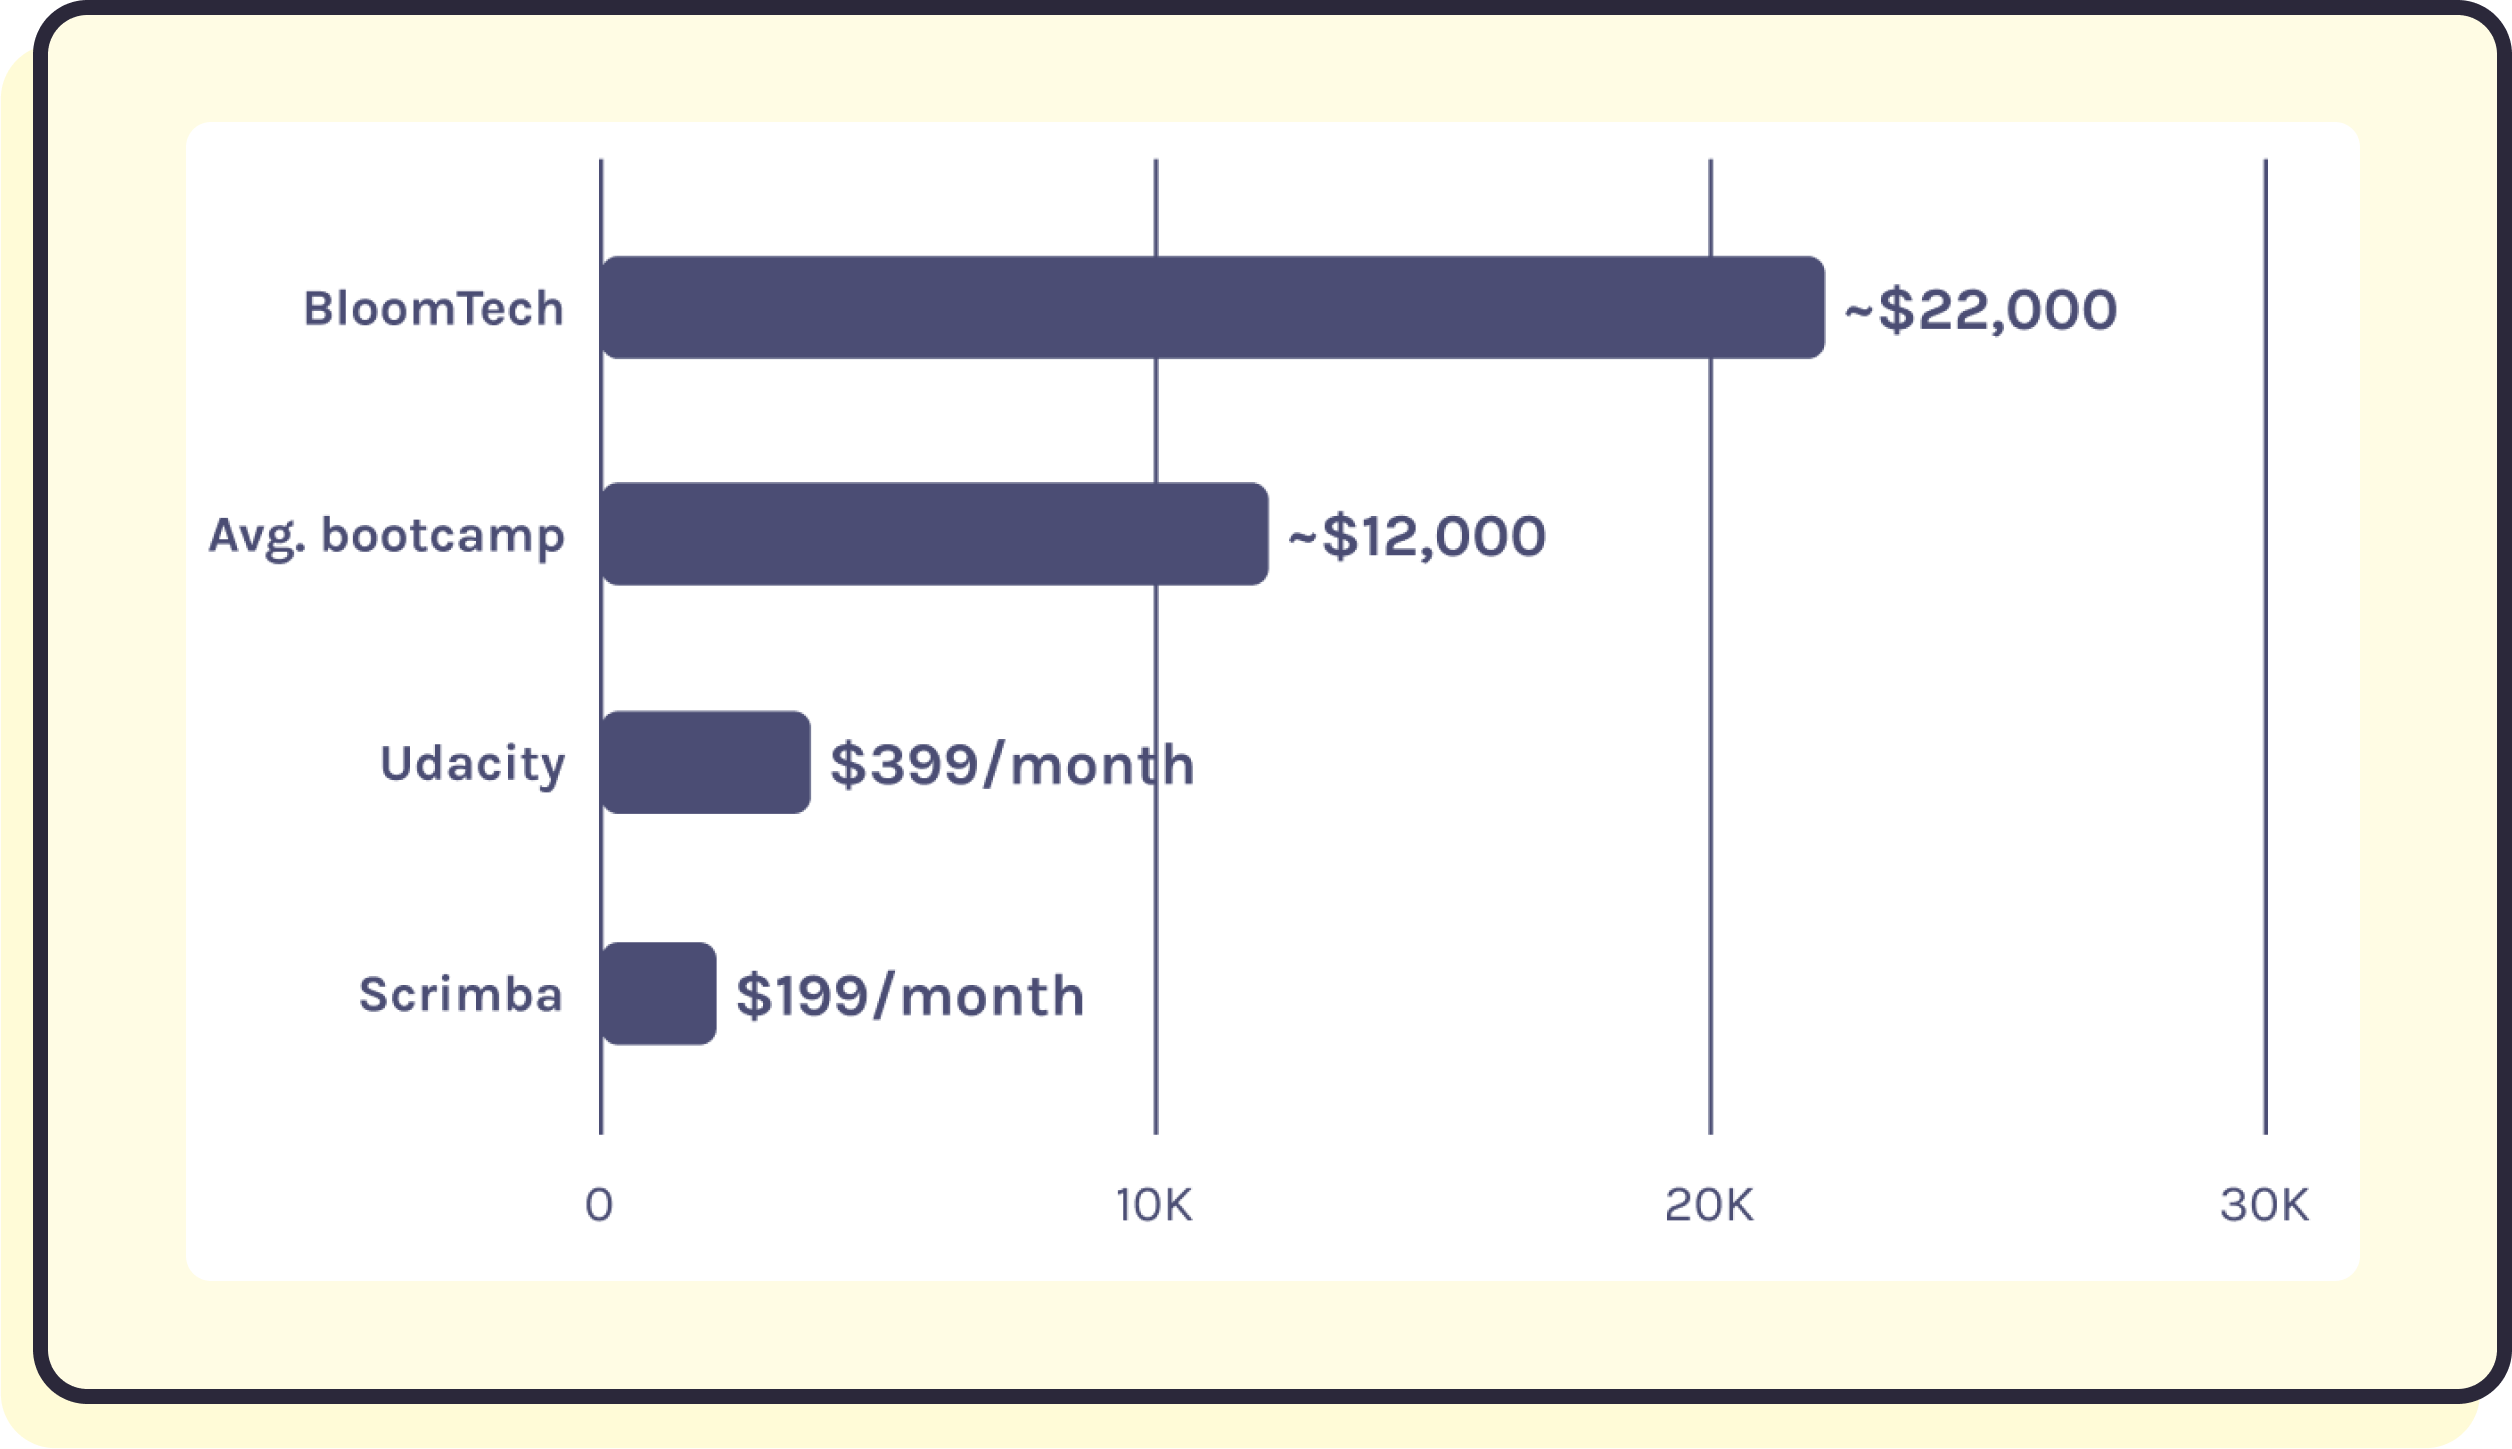 Scrimba's $199/month price compared to other online coding schools